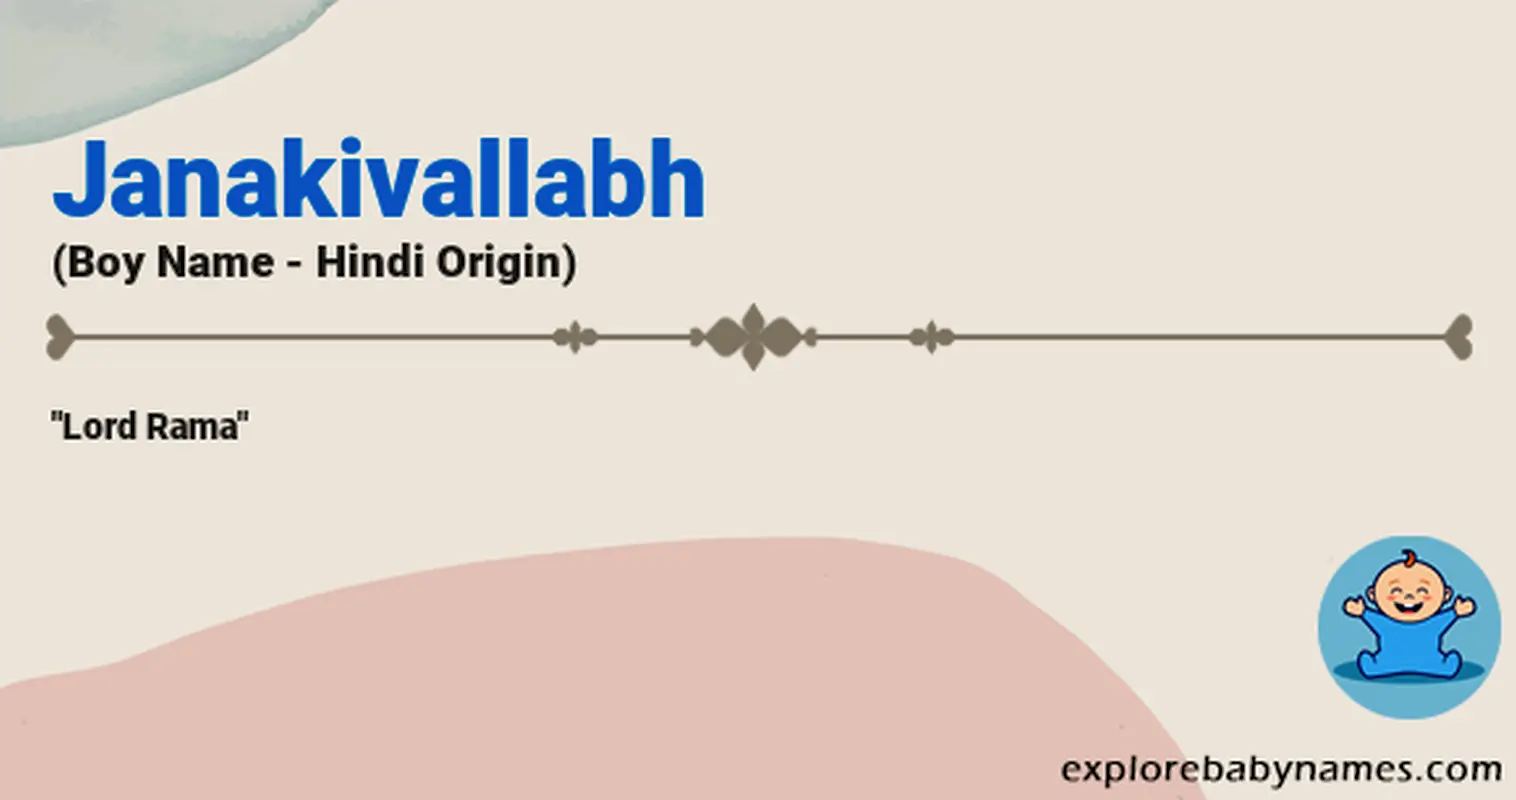 Meaning of Janakivallabh